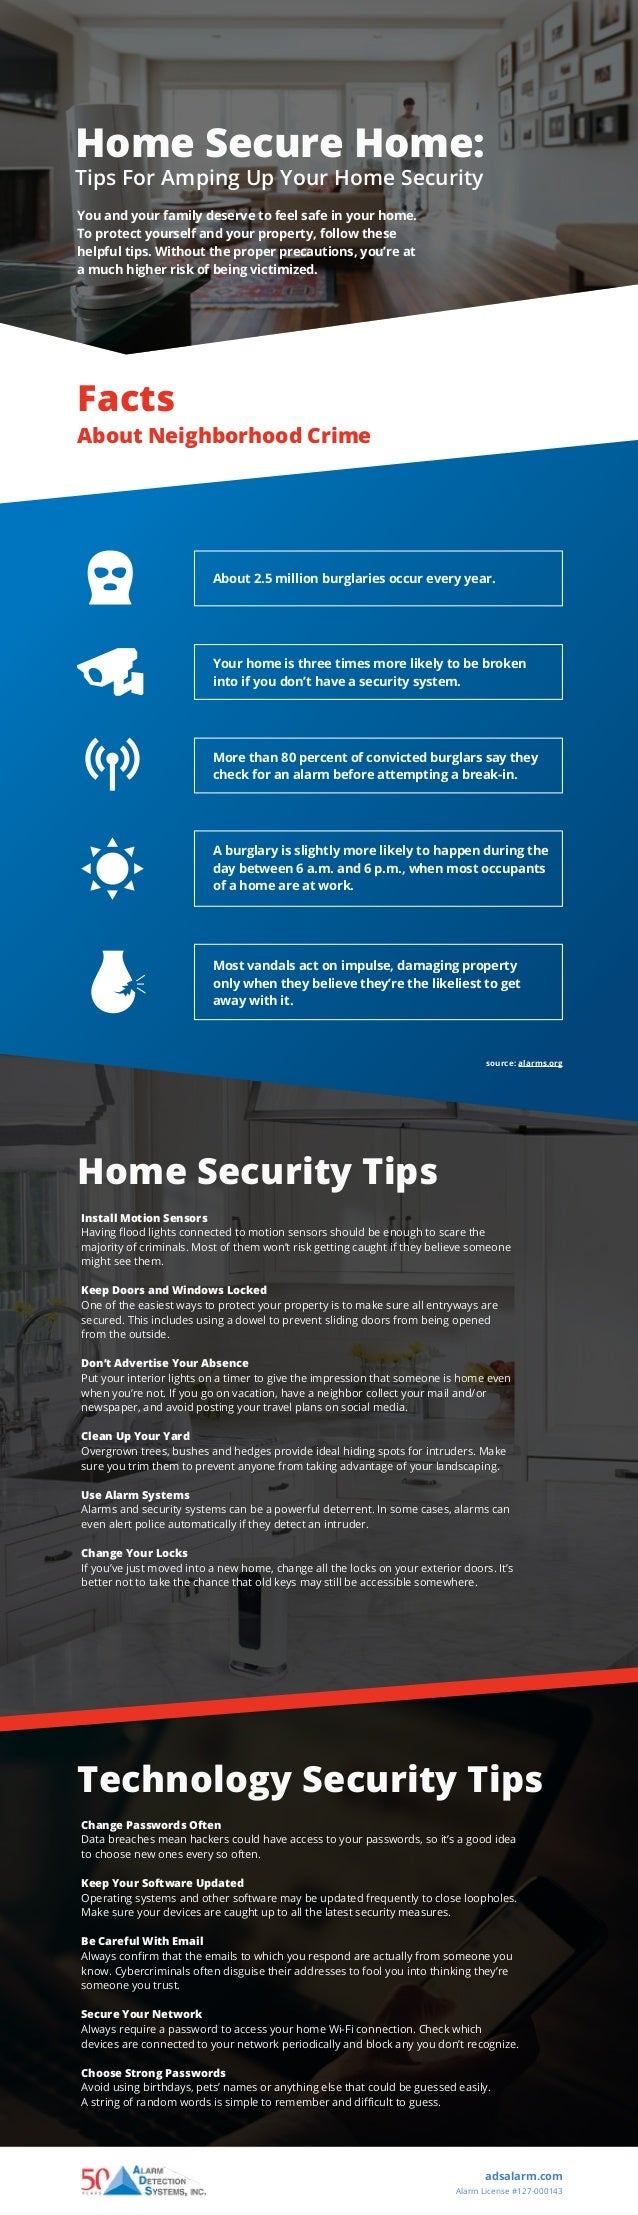 Infographic about home security